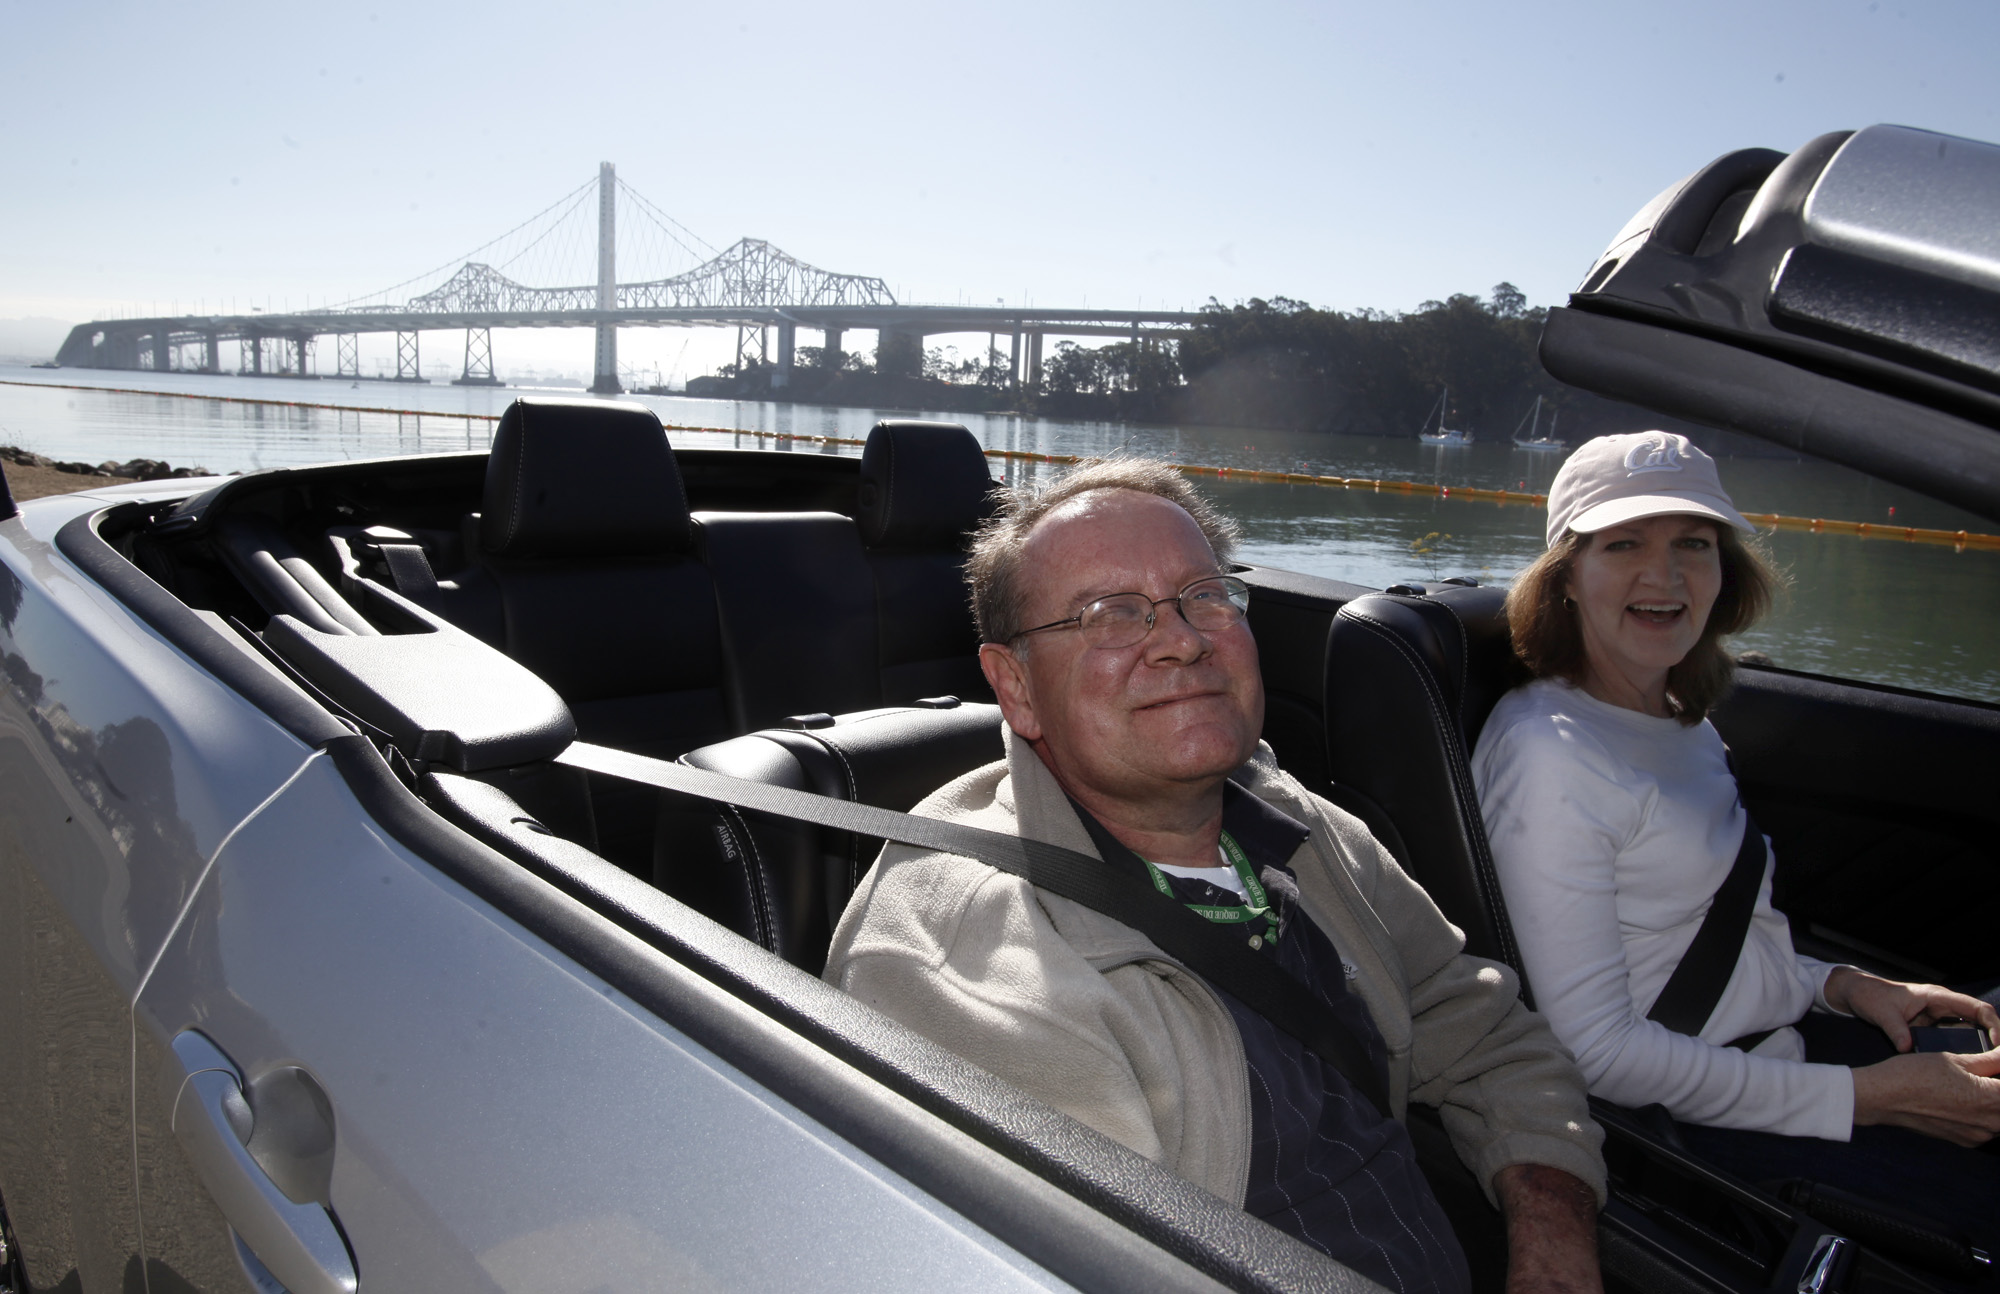 San Jose Mercury News transportation columnist, Gary "Mr. Roadshow" Richards takes a test drive on the new Bay Bridge, with his wife Jan, during the first morning commute on the new $6.4 billion span Tuesday Sept. 3, 2013 in Oakland, Calif. (Karl Mondon/Bay Area News Group)